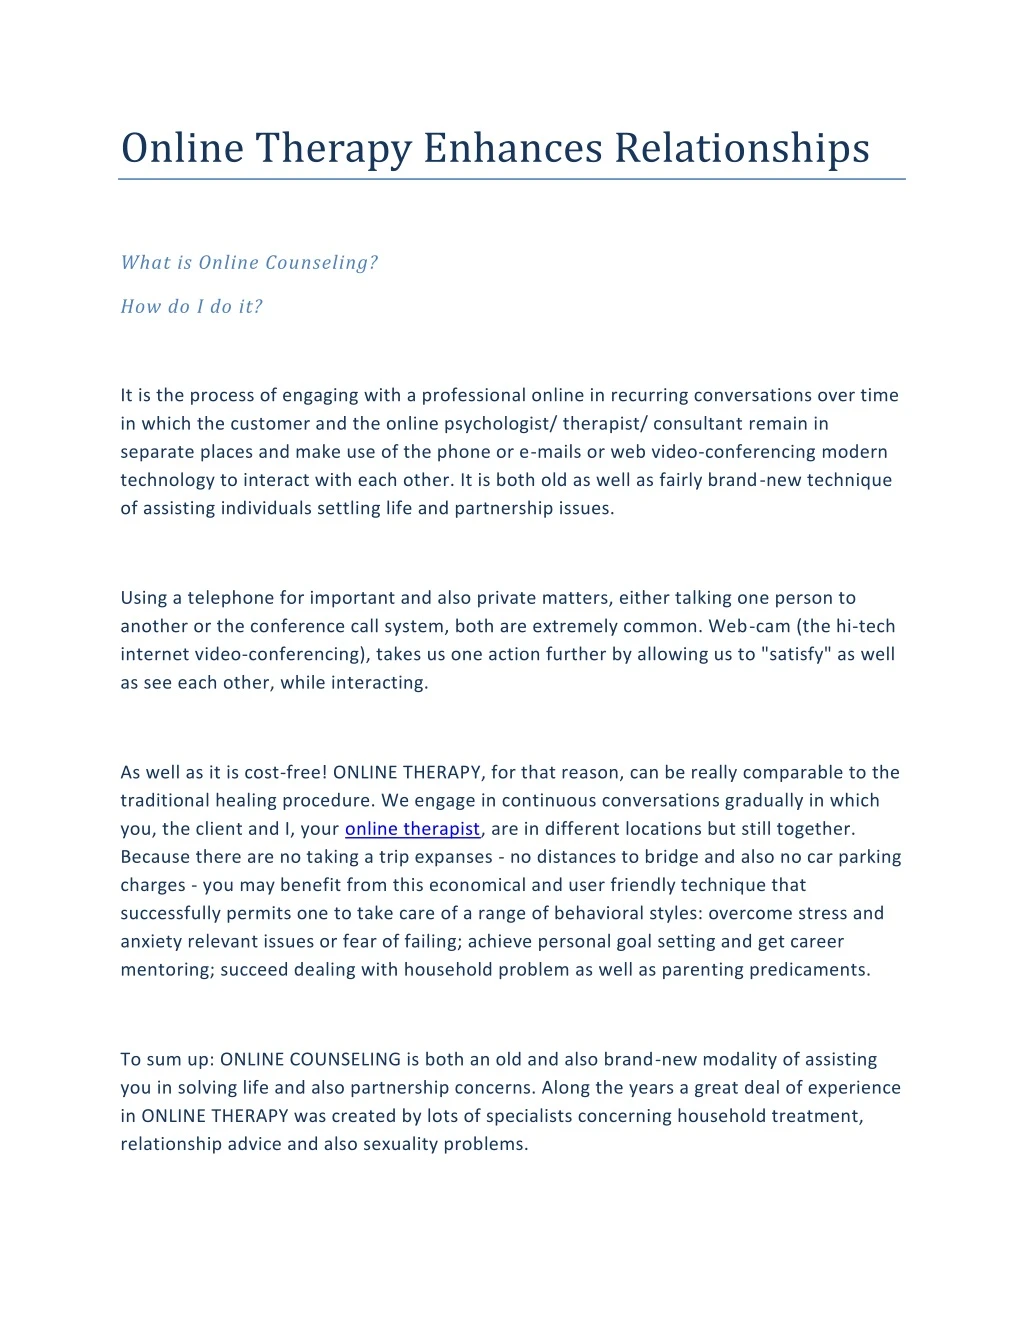 online therapy enhances relationships